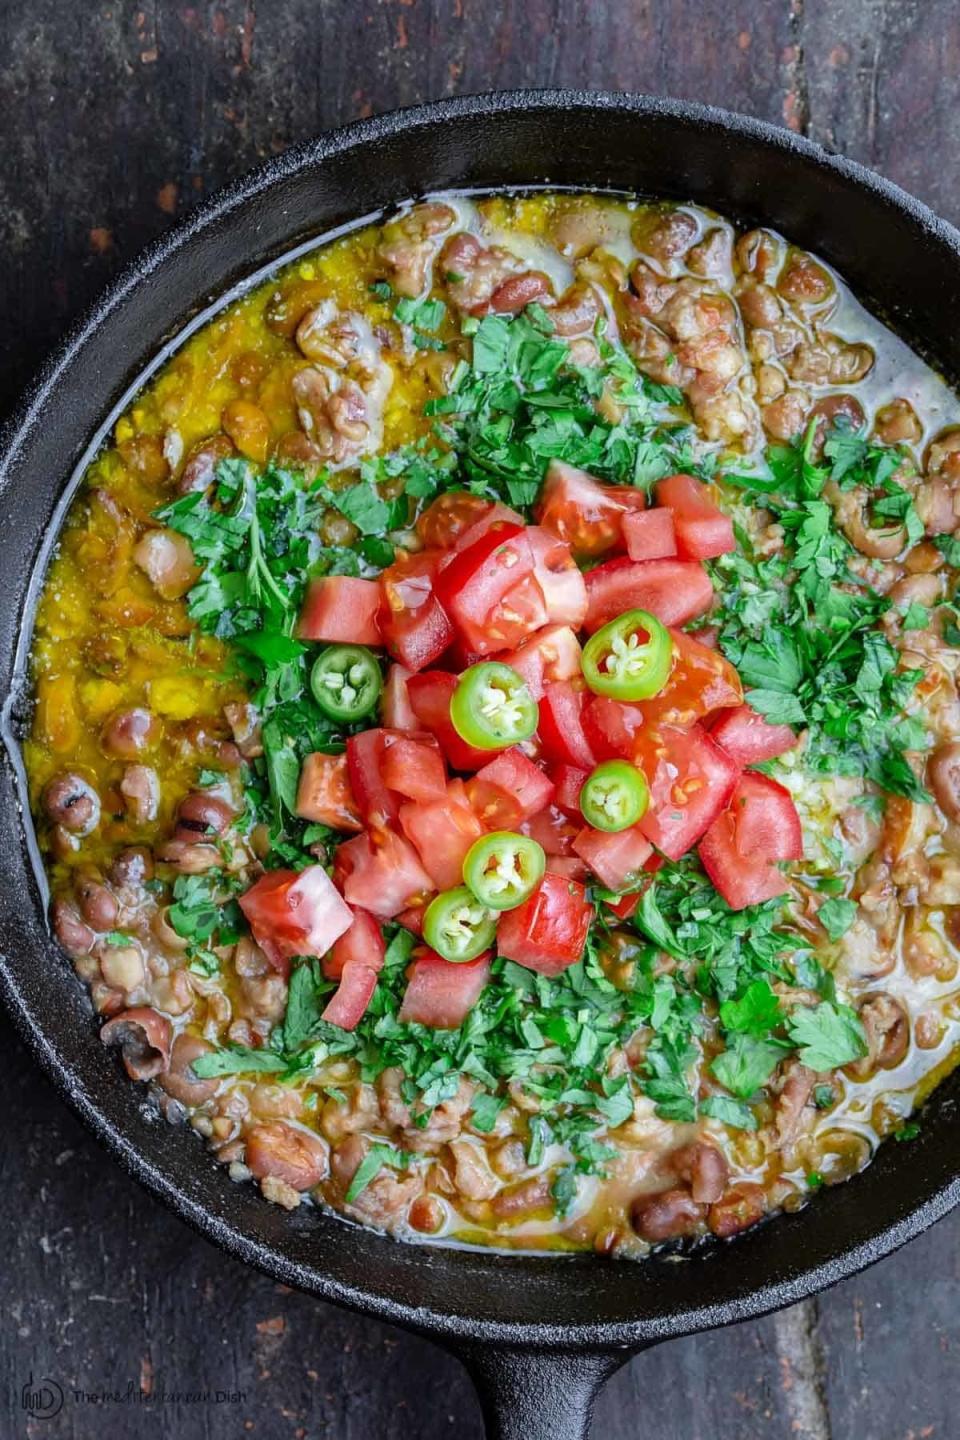 Egyptian fava bean dip in a skillet with tomatoes and herbs.